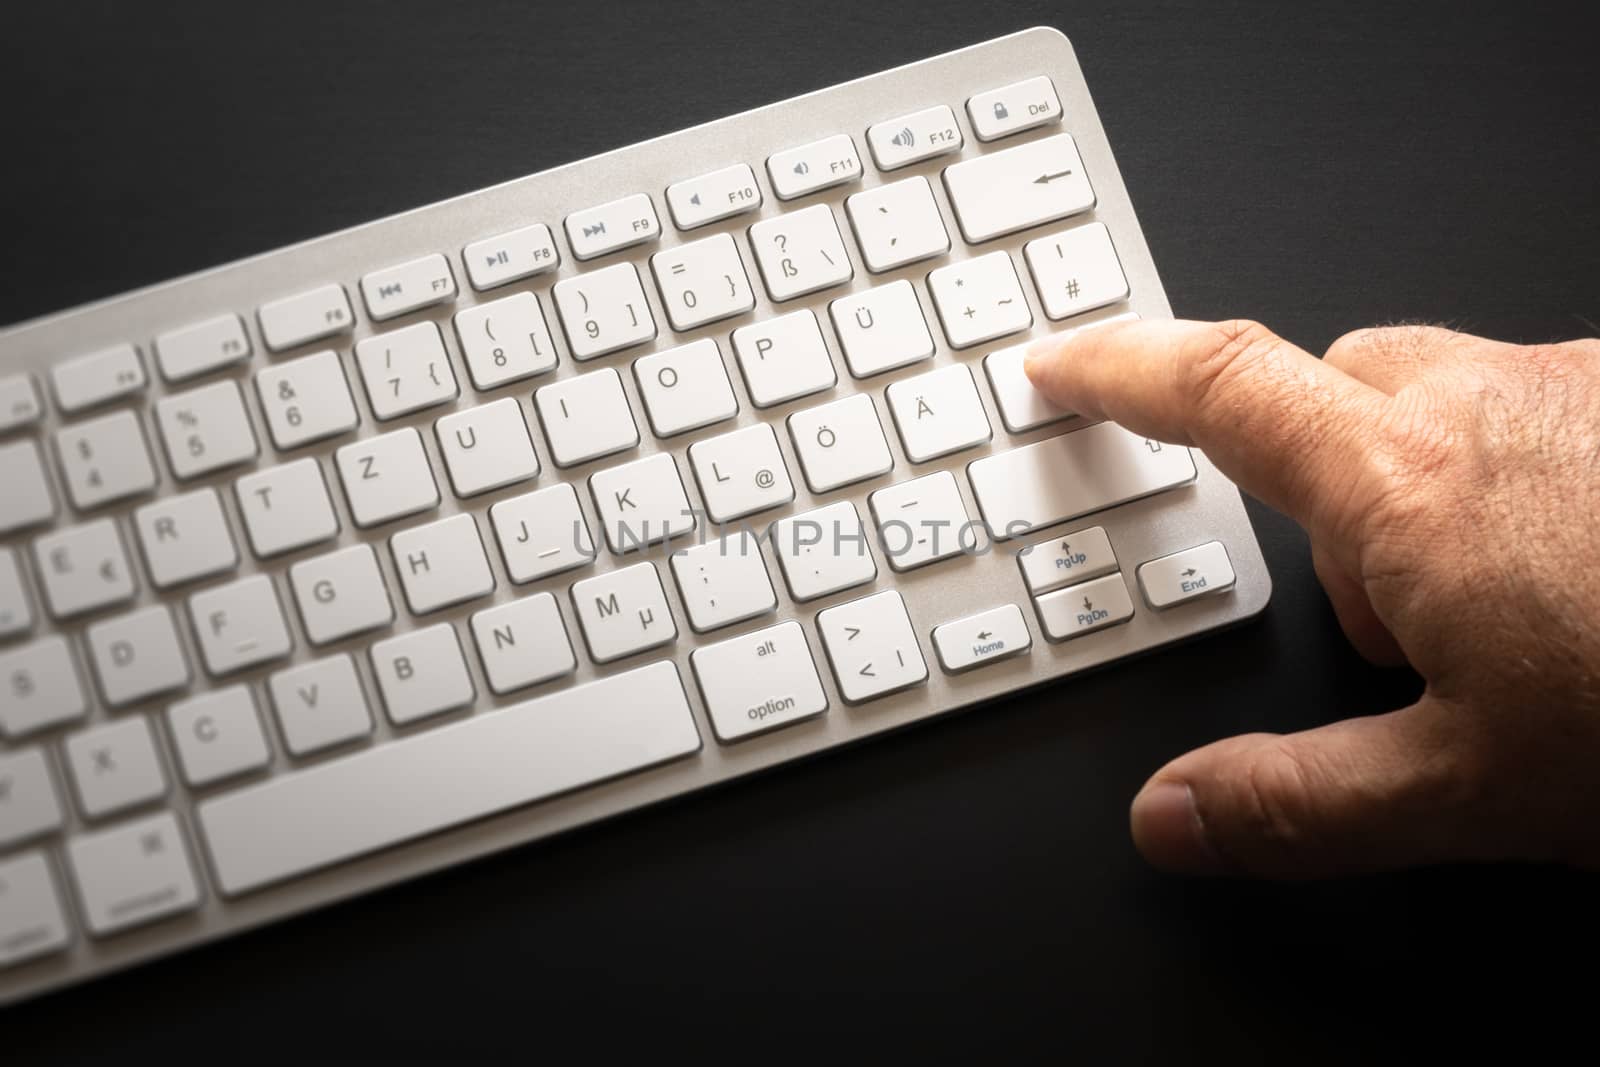 An image of a typical computer keyboard with finger on enter